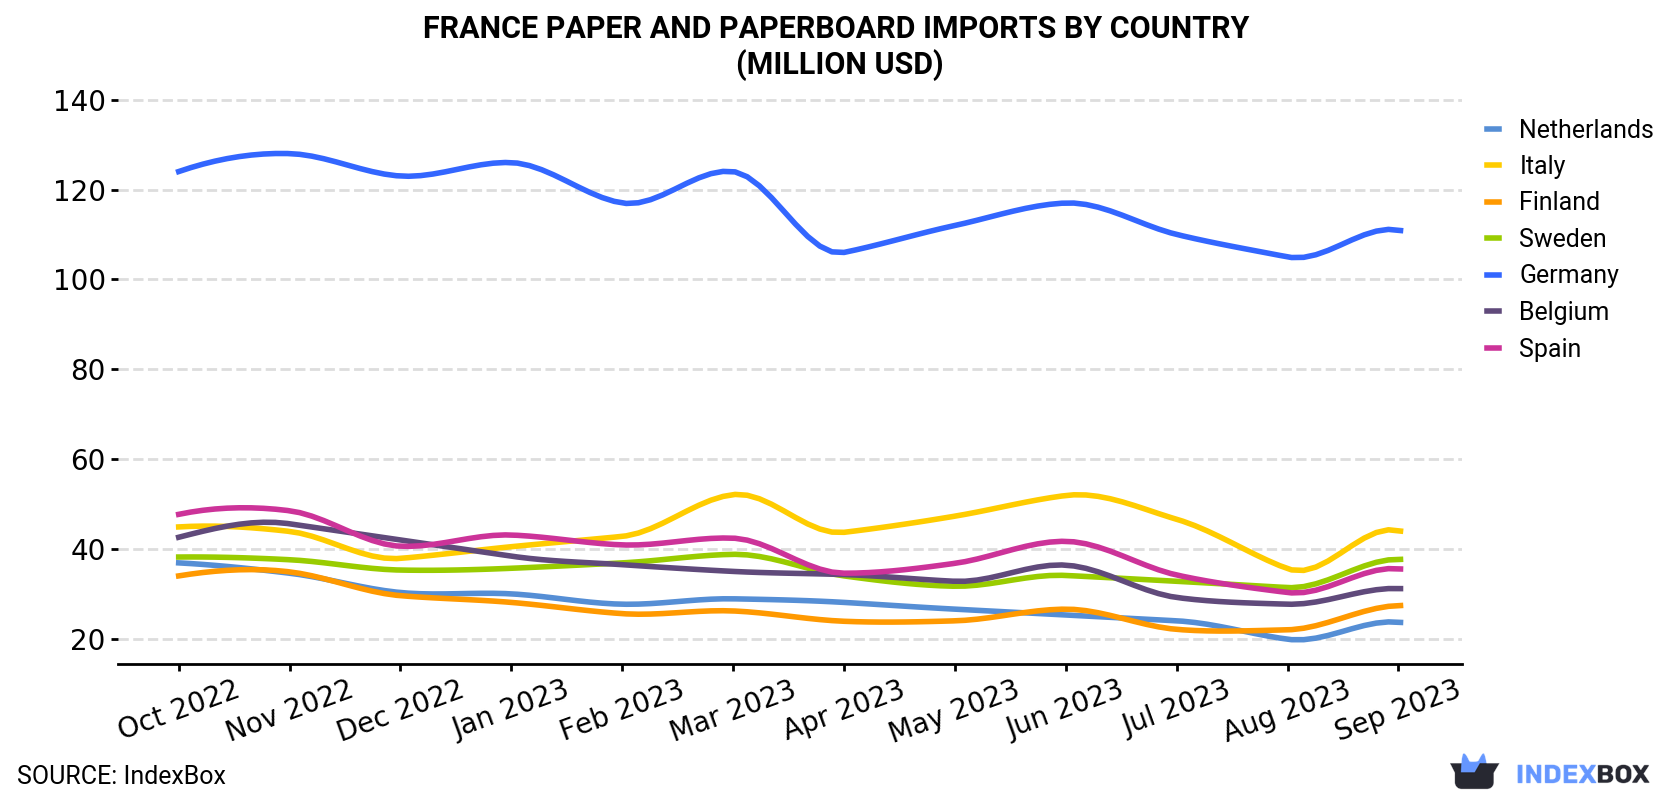 France Paper and Paperboard Imports By Country (Million USD)